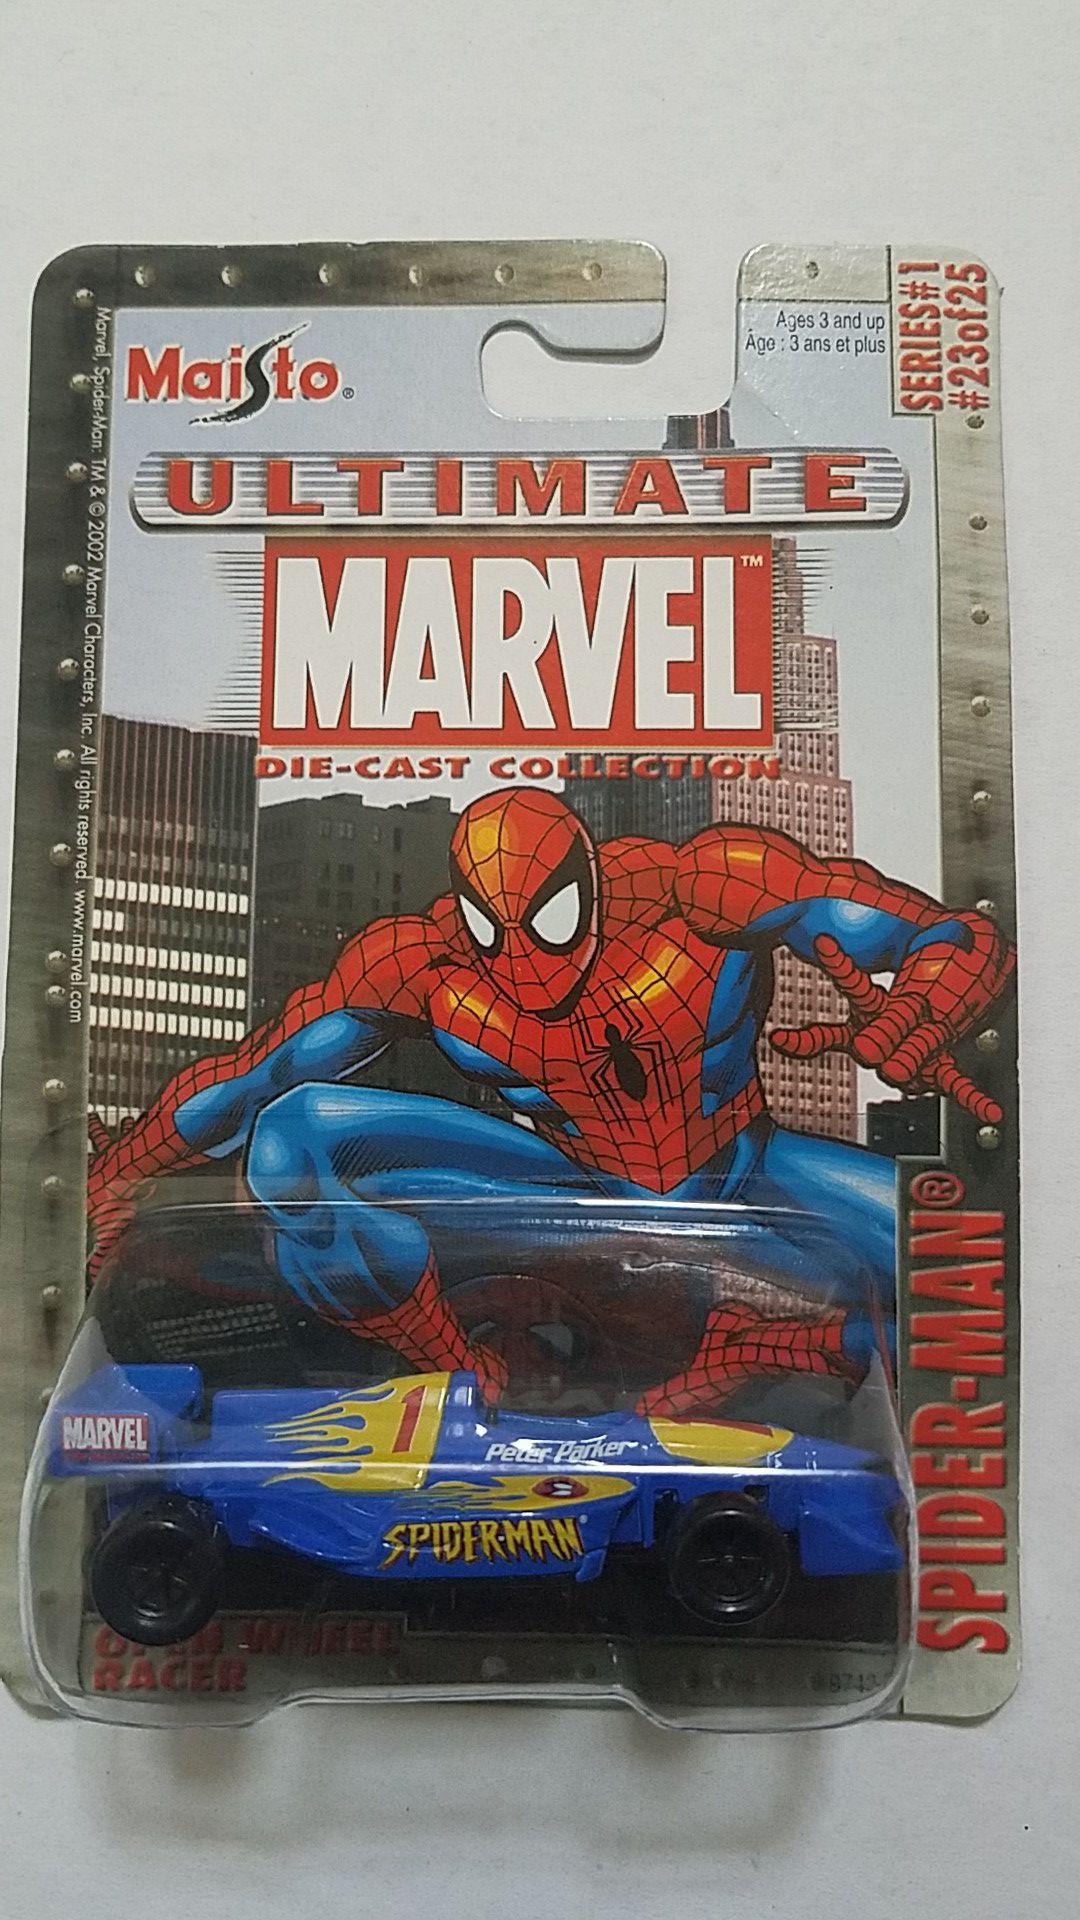 Maisto ULTIMATE MARVEL SPIDERMAN SERIES 1 # 23 OPEN WHEEL RACER HAVE MANY MORE